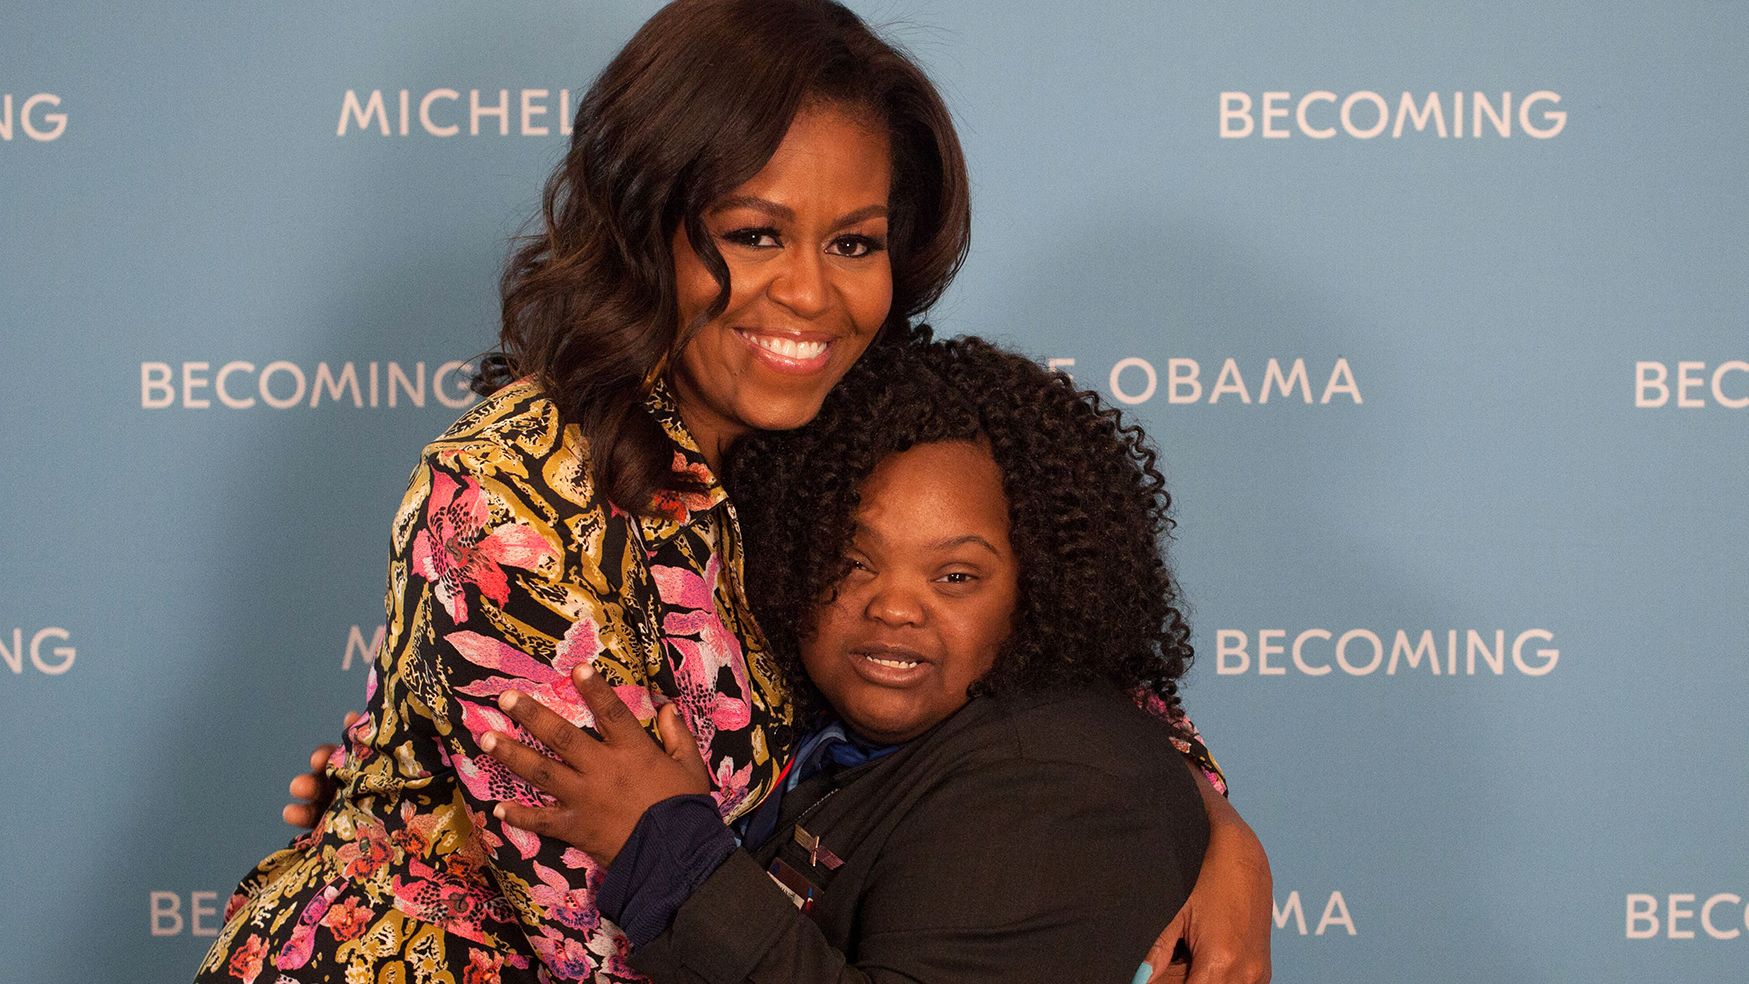 Since meeting Michelle Obama, Pooser refers to her mother as "Mrs. Berry" because the former first lady "is her new momma," Miller-Berry says.  